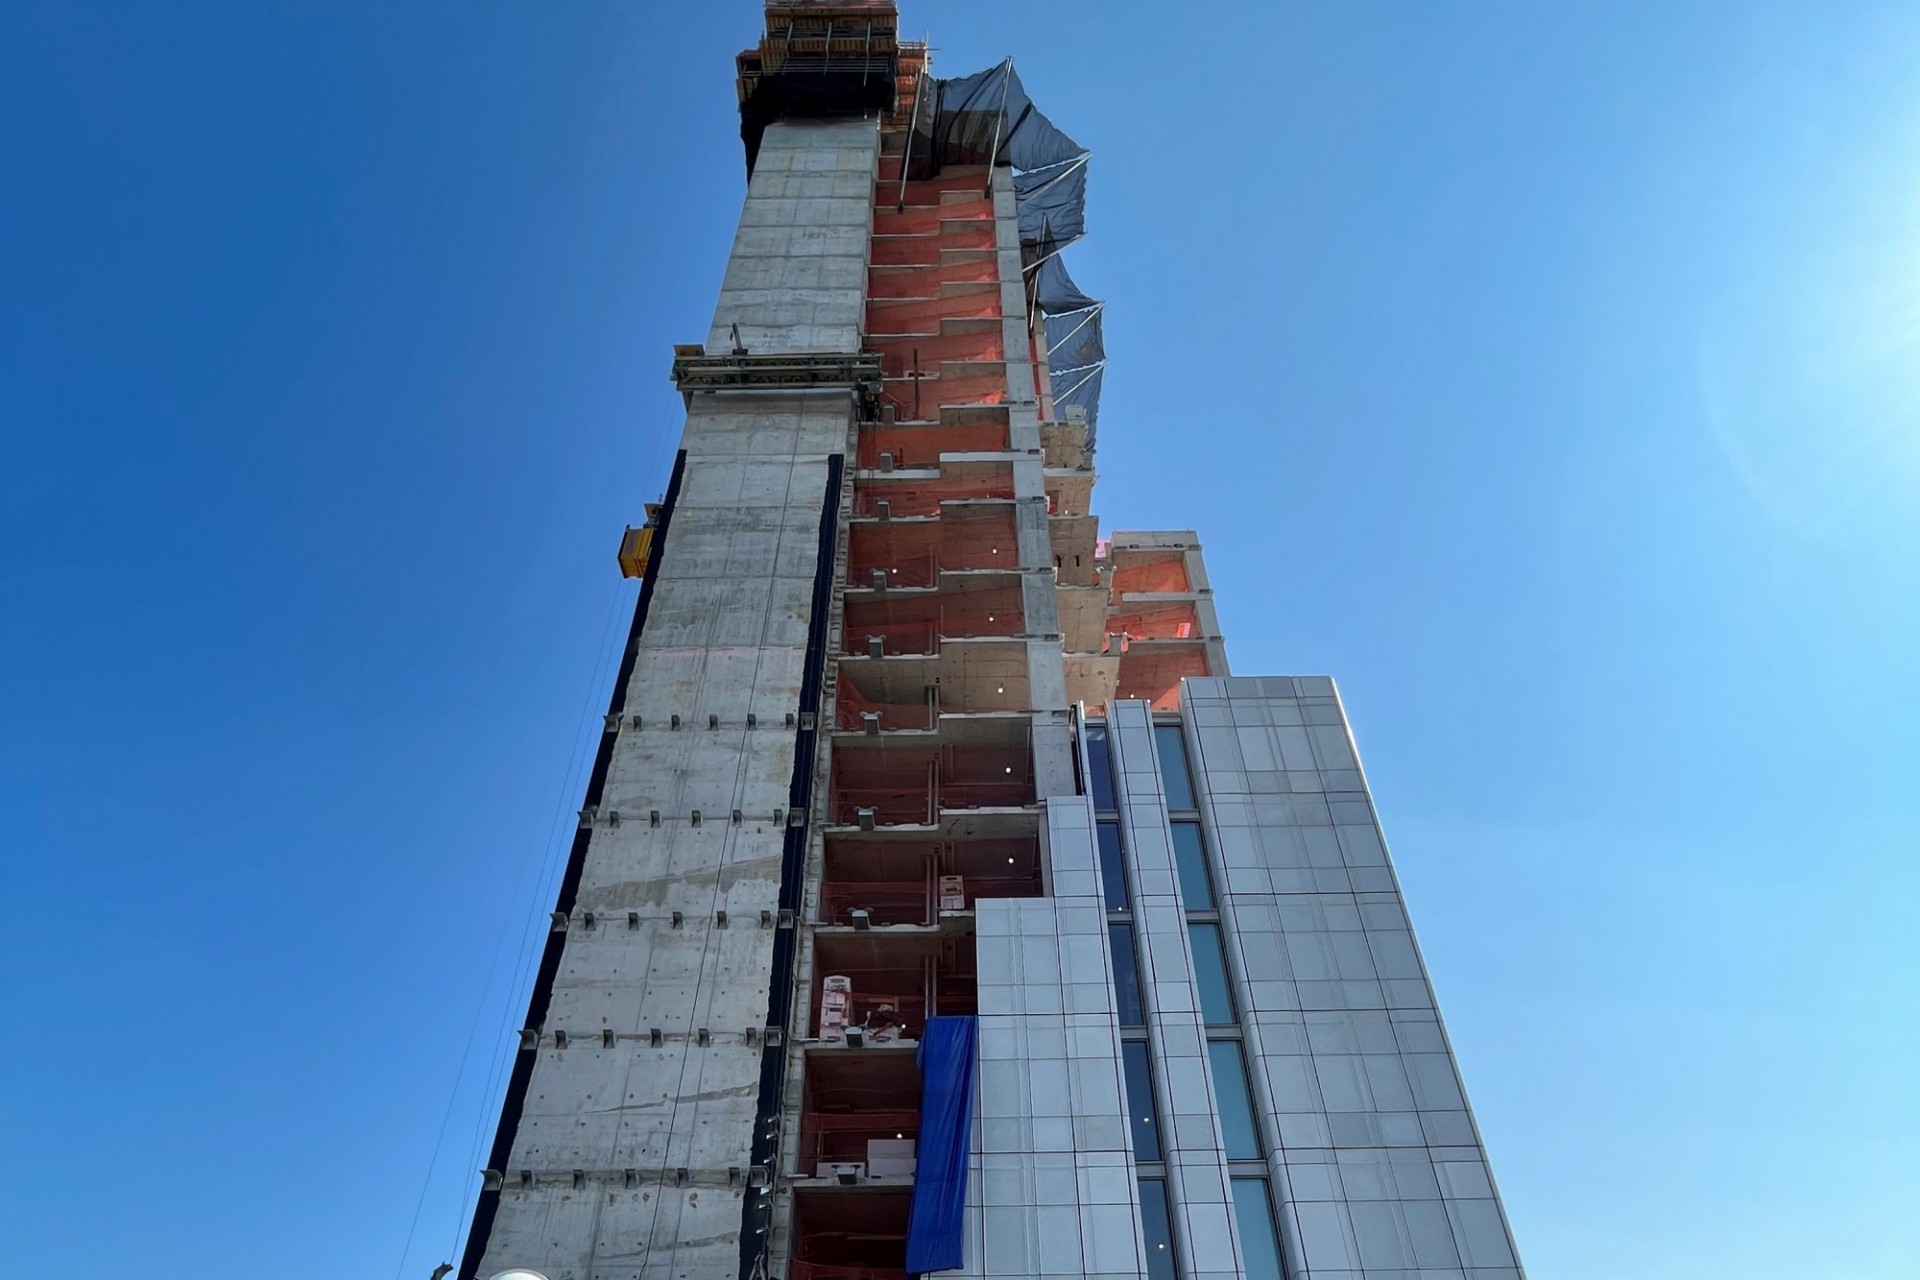 A view of the 600 W. 125th Street construction site which is 33 floors high, and has some facade panels installed around it. 